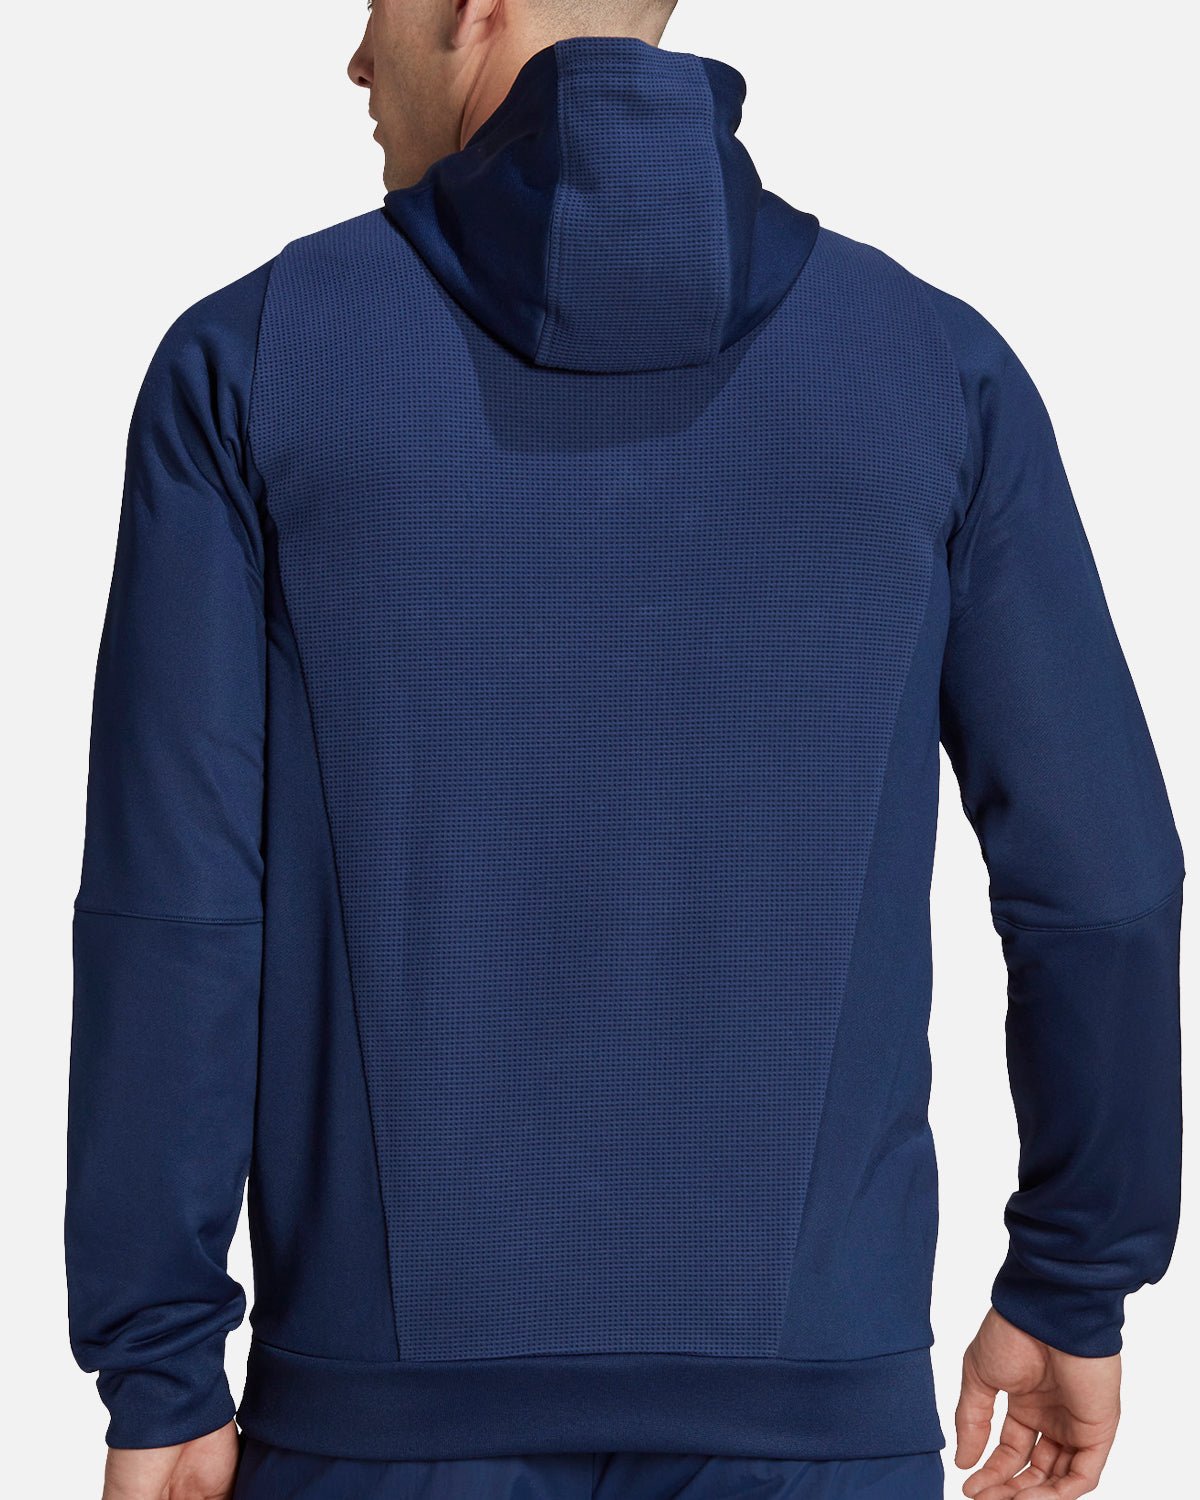 NFFC Navy Travel Hoodie 23-24 - Nottingham Forest FC